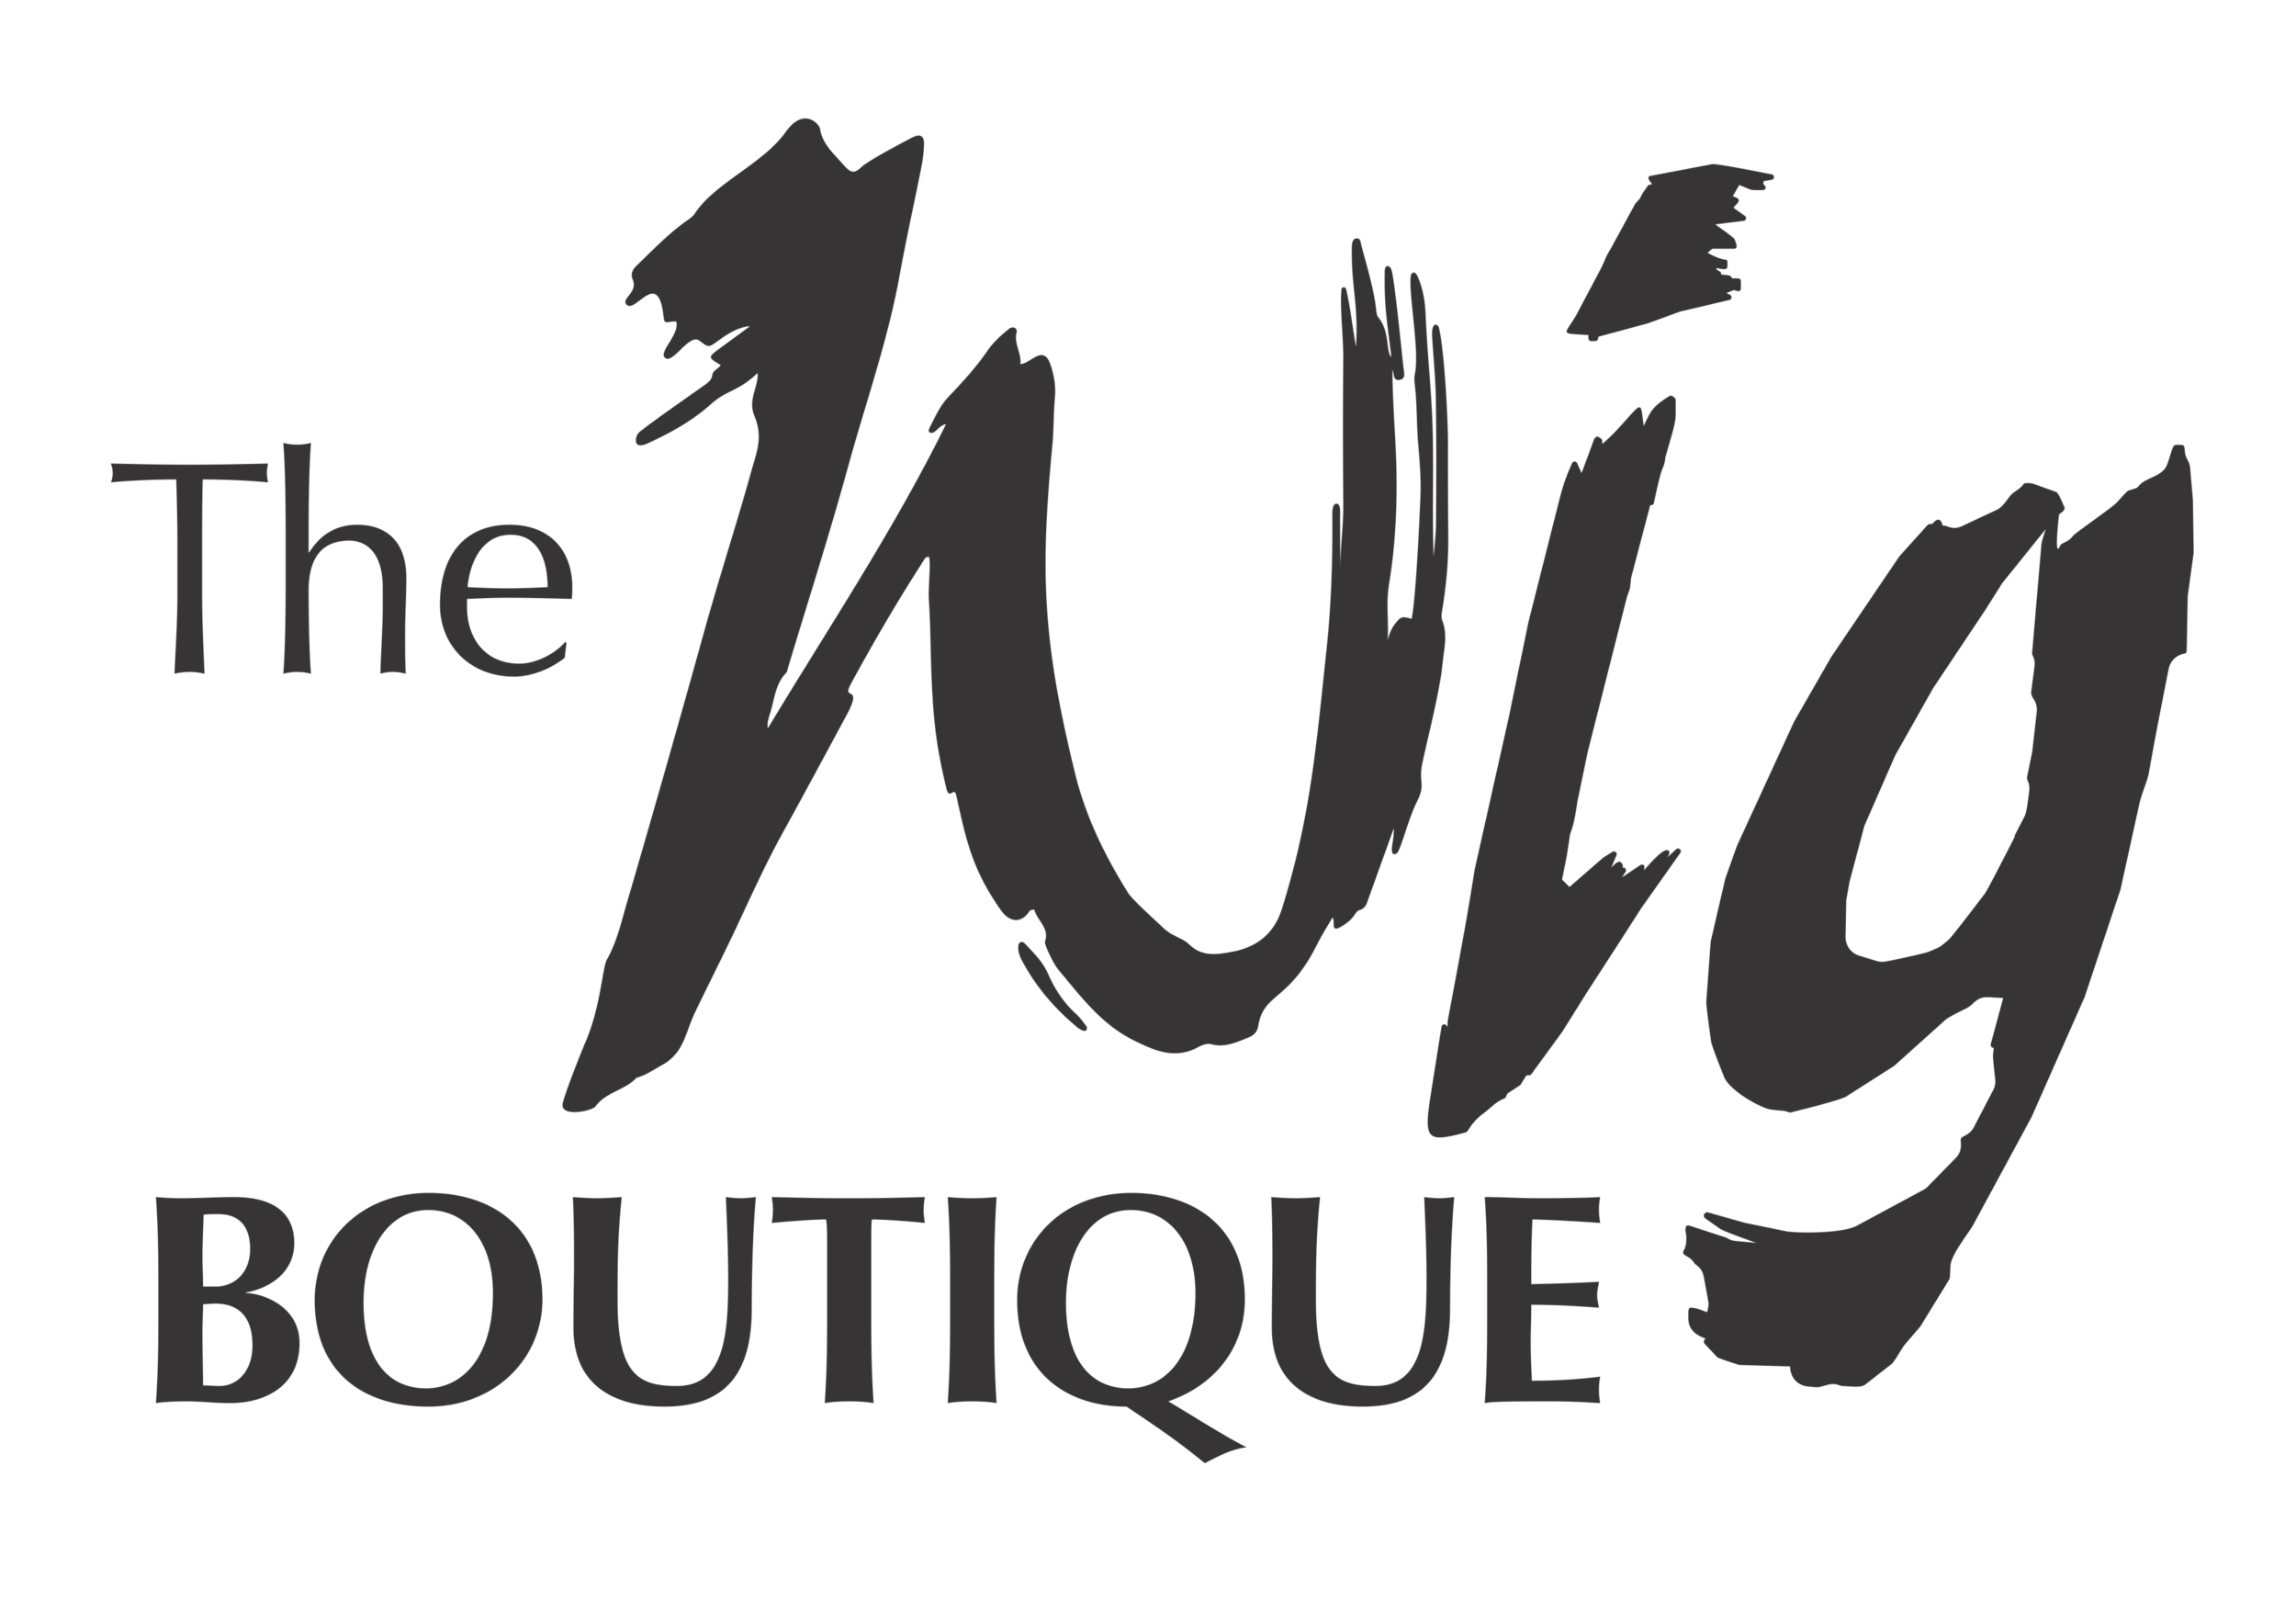 The Wig Boutique